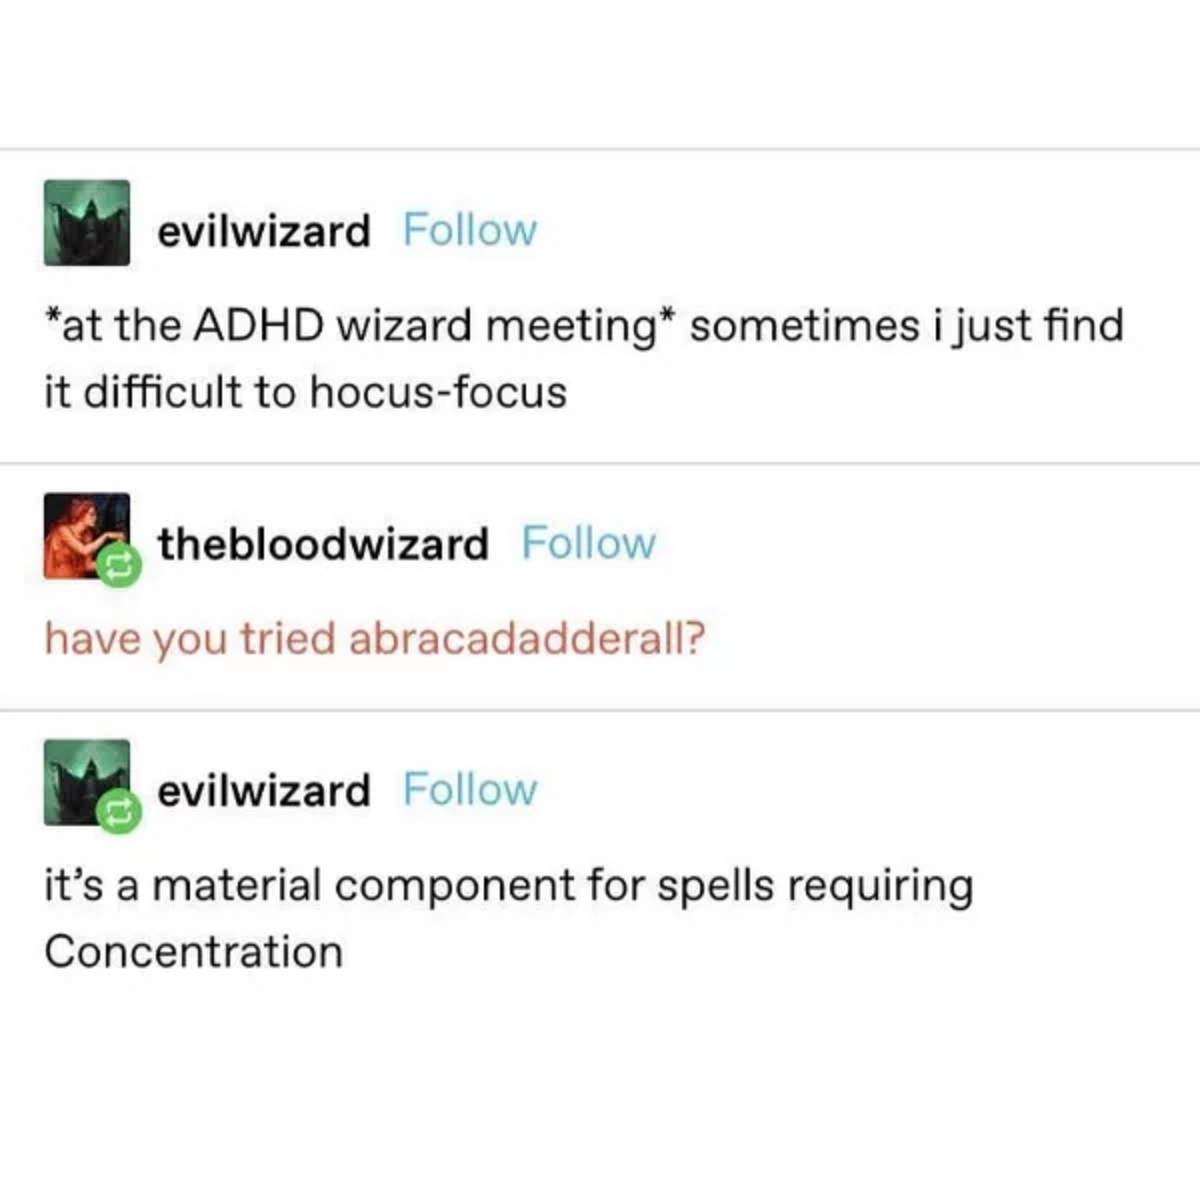 document - evilwizard at the Adhd wizard meeting sometimes i just find it difficult to hocusfocus thebloodwizard have you tried abracadadderall? evilwizard it's a material component for spells requiring Concentration